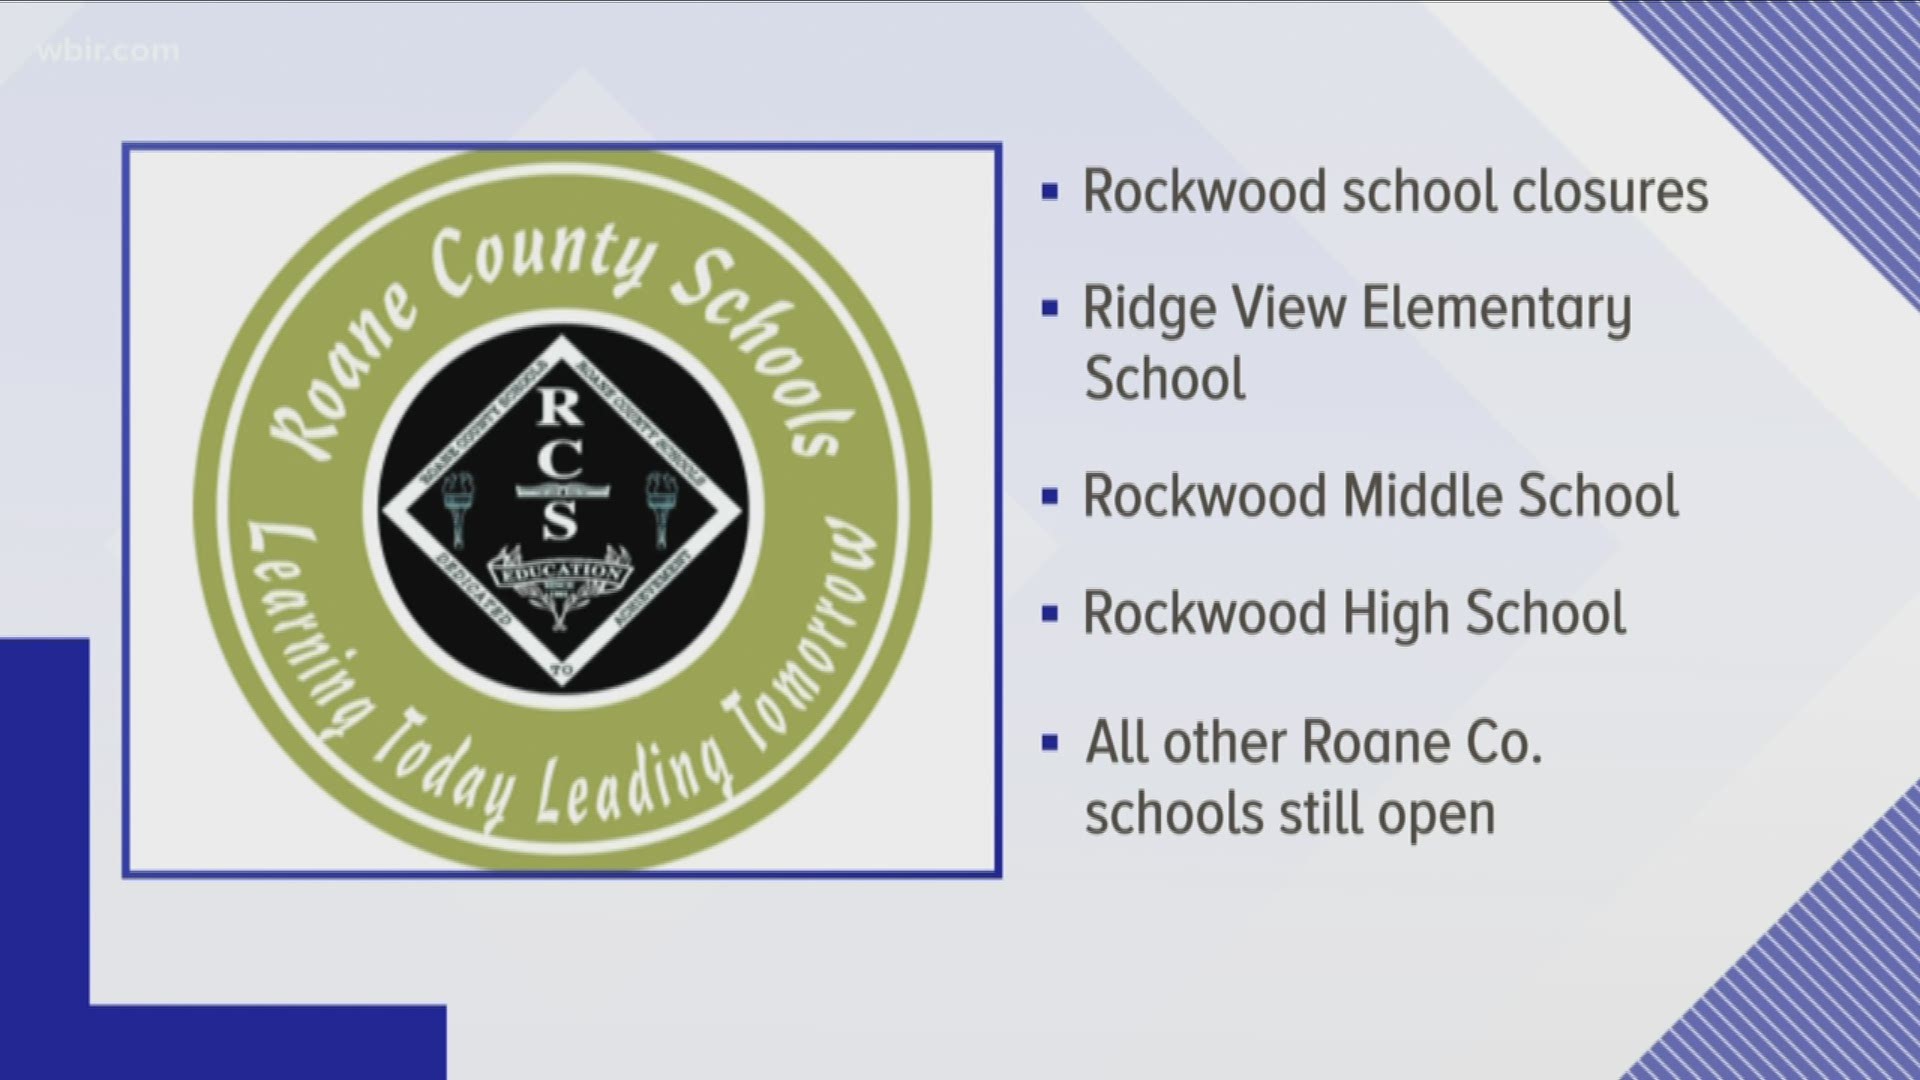 People received an automated text message that said all Roane County schools are closed that cited WBIR. It was not sent out by our team but by the school district.